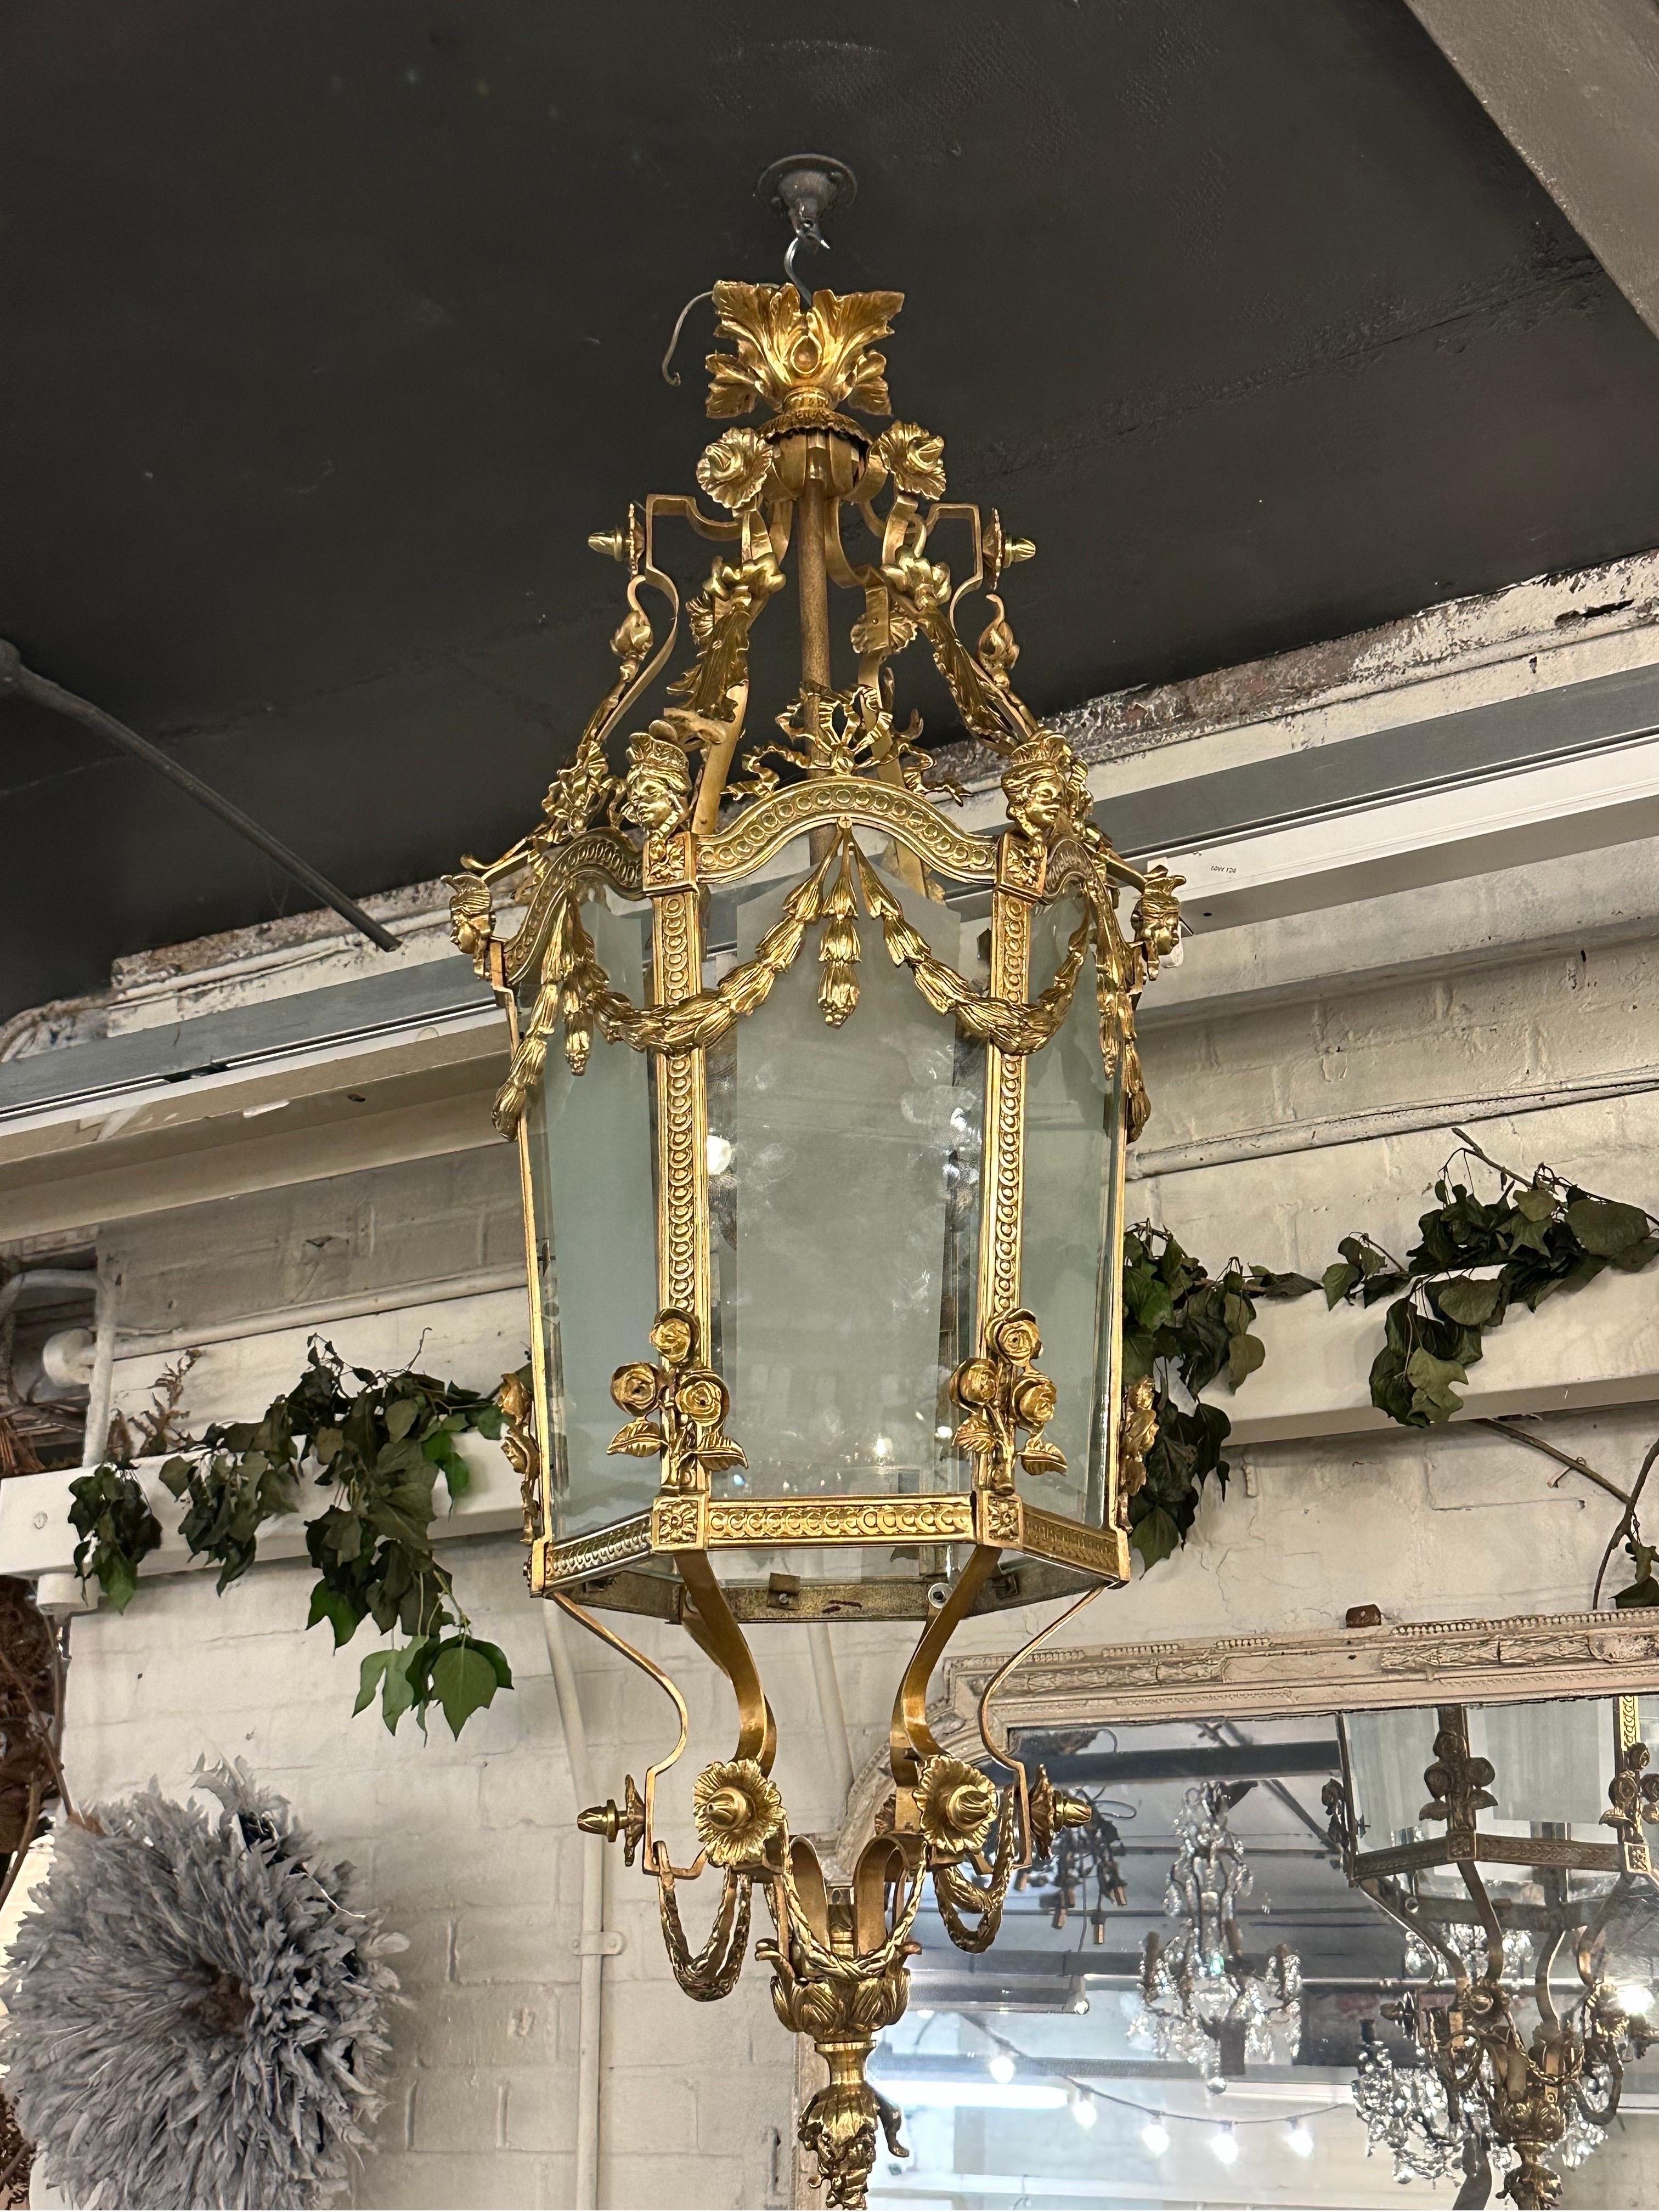 For those with a discerning taste for the extraordinary, we present an exquisite Antique Baroque Bronze Lantern that will transport you to a bygone era of opulence and grandeur. 

This magnificent lantern is a true testament to the beauty and